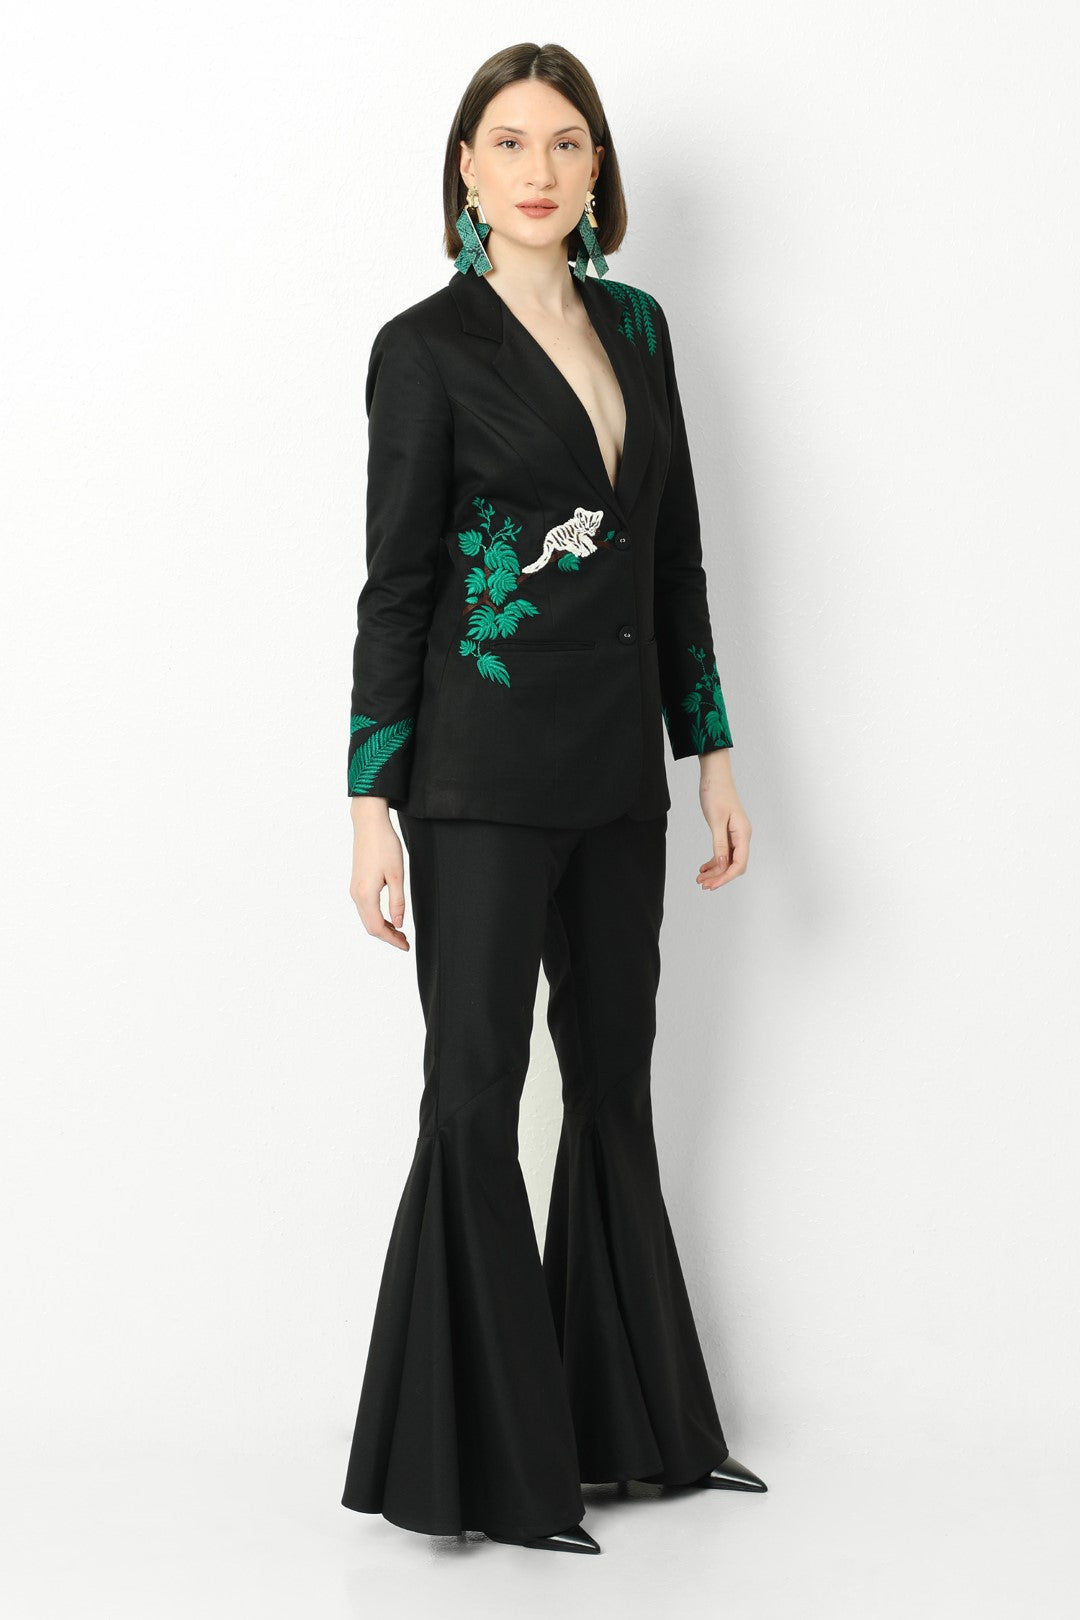 Tribe Queen Pant Suit